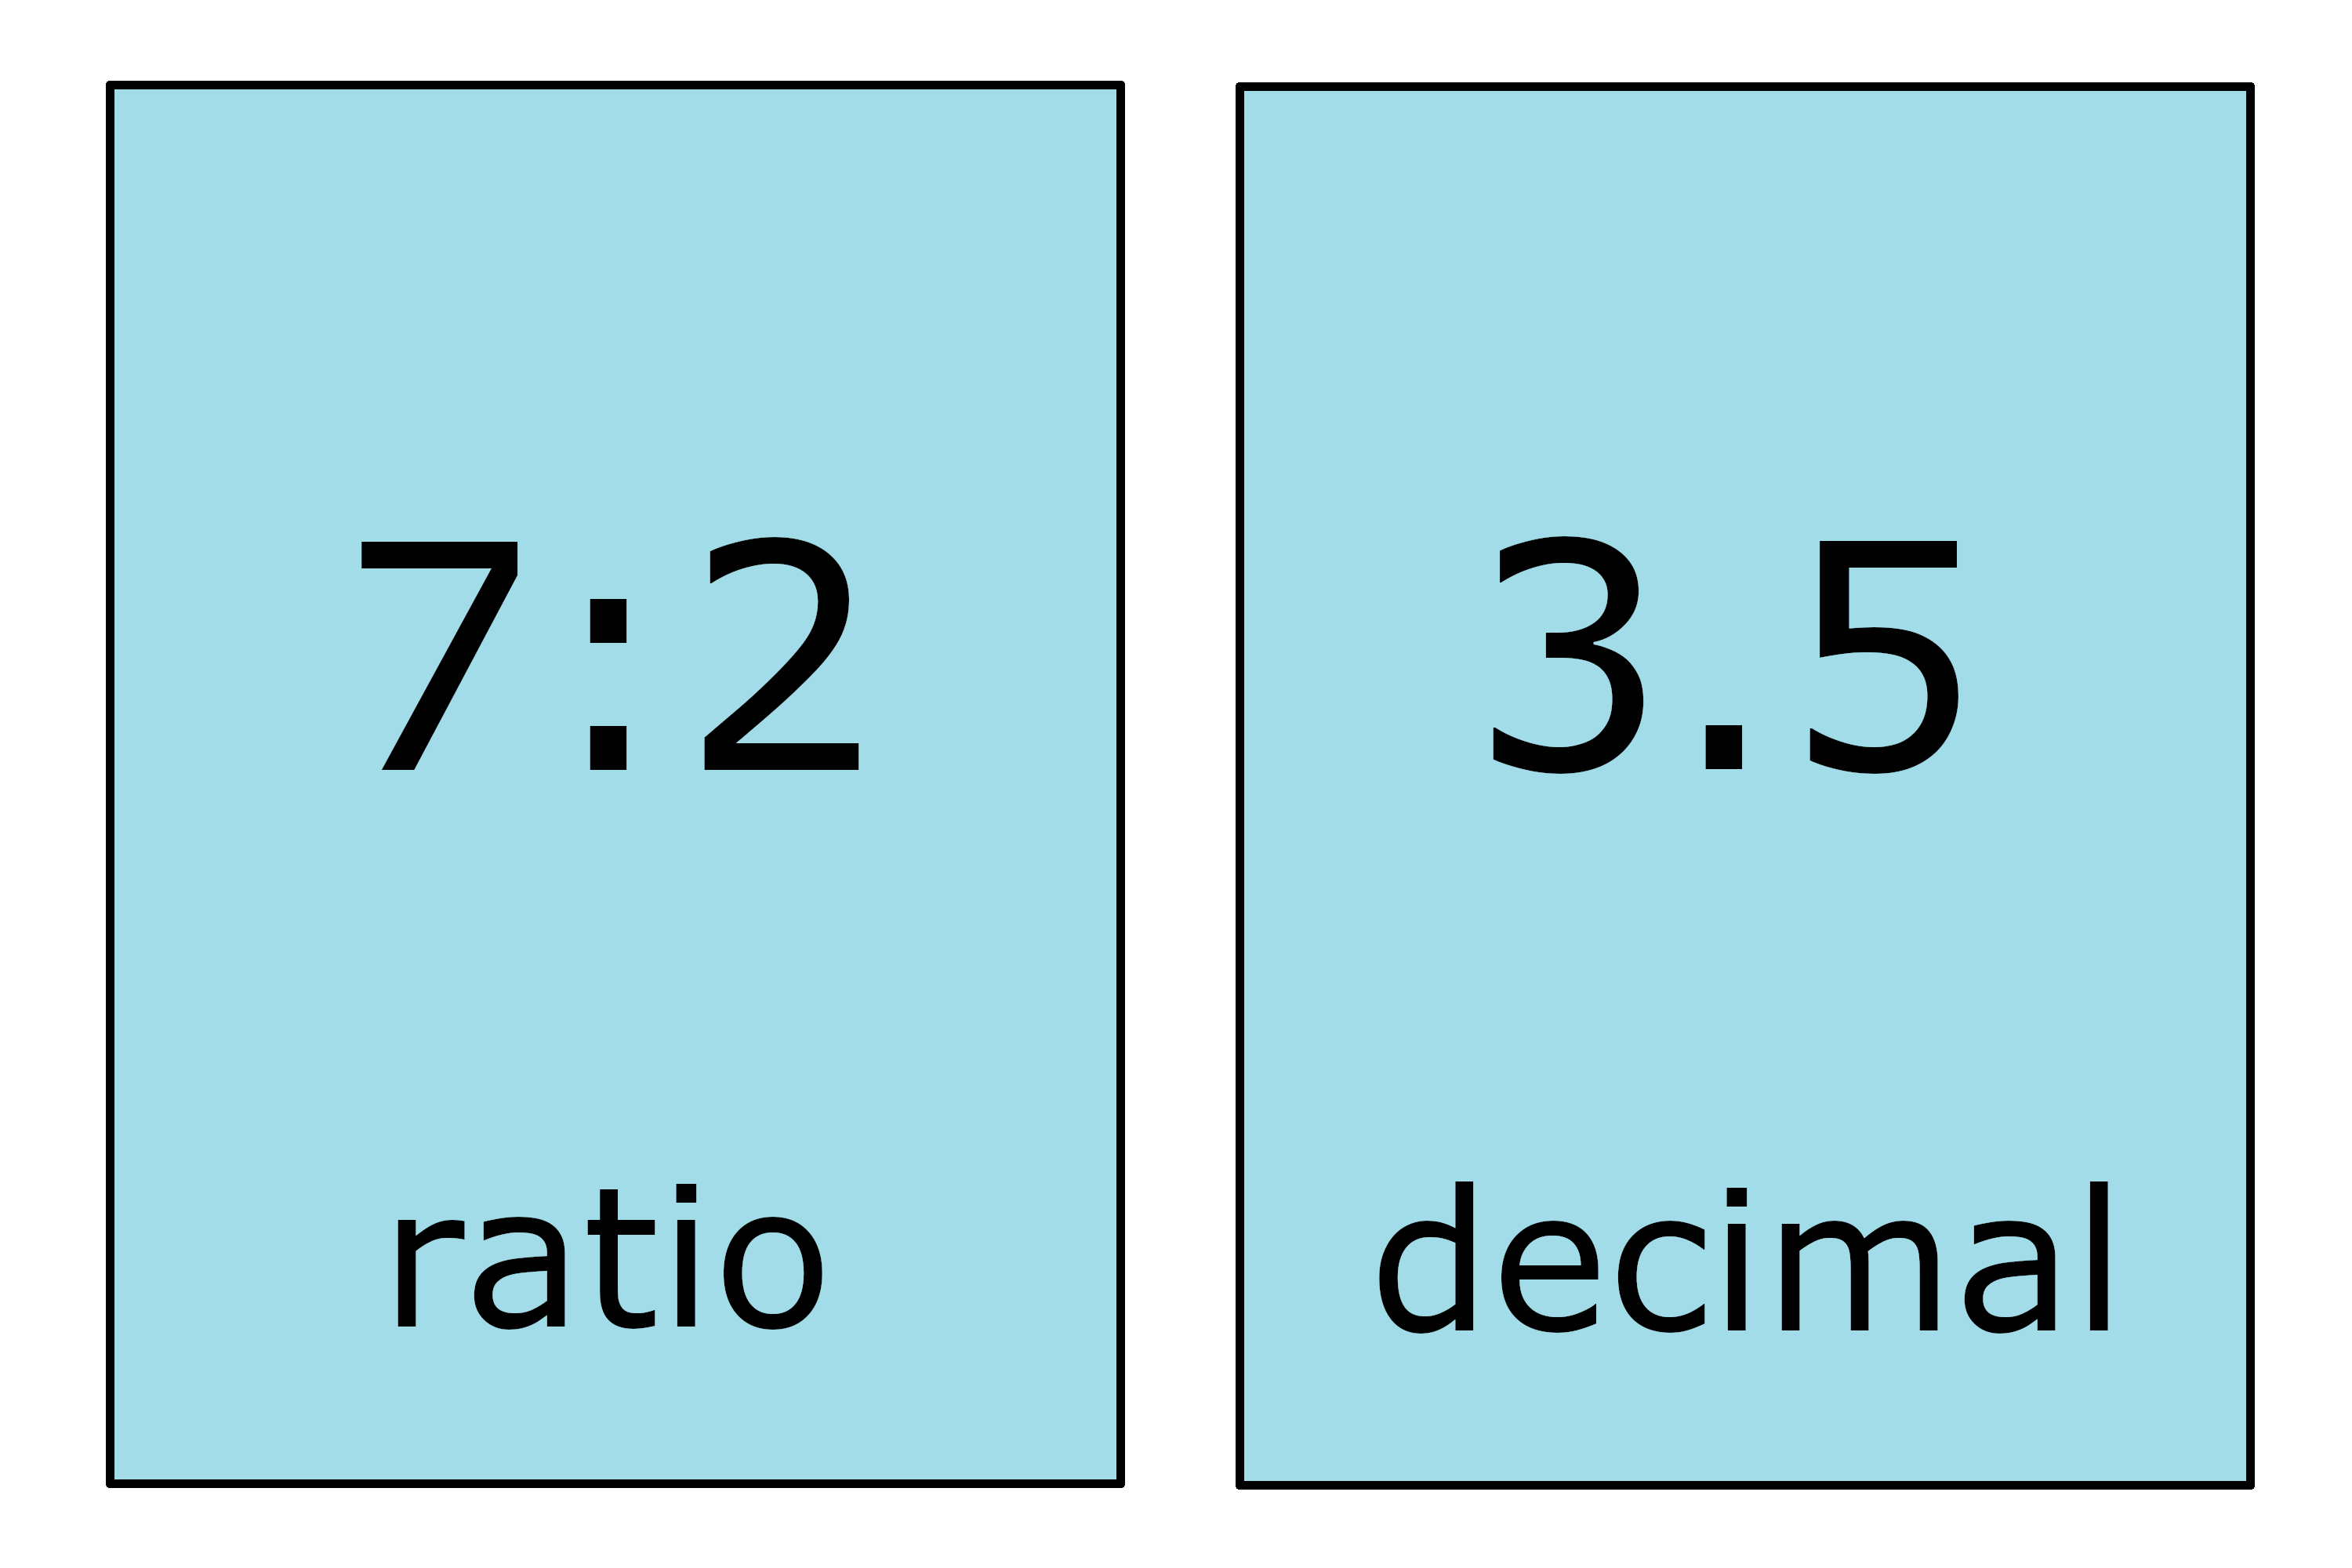 illustration showing how to rewrite the ratio 7:2 as a decimal 3.5